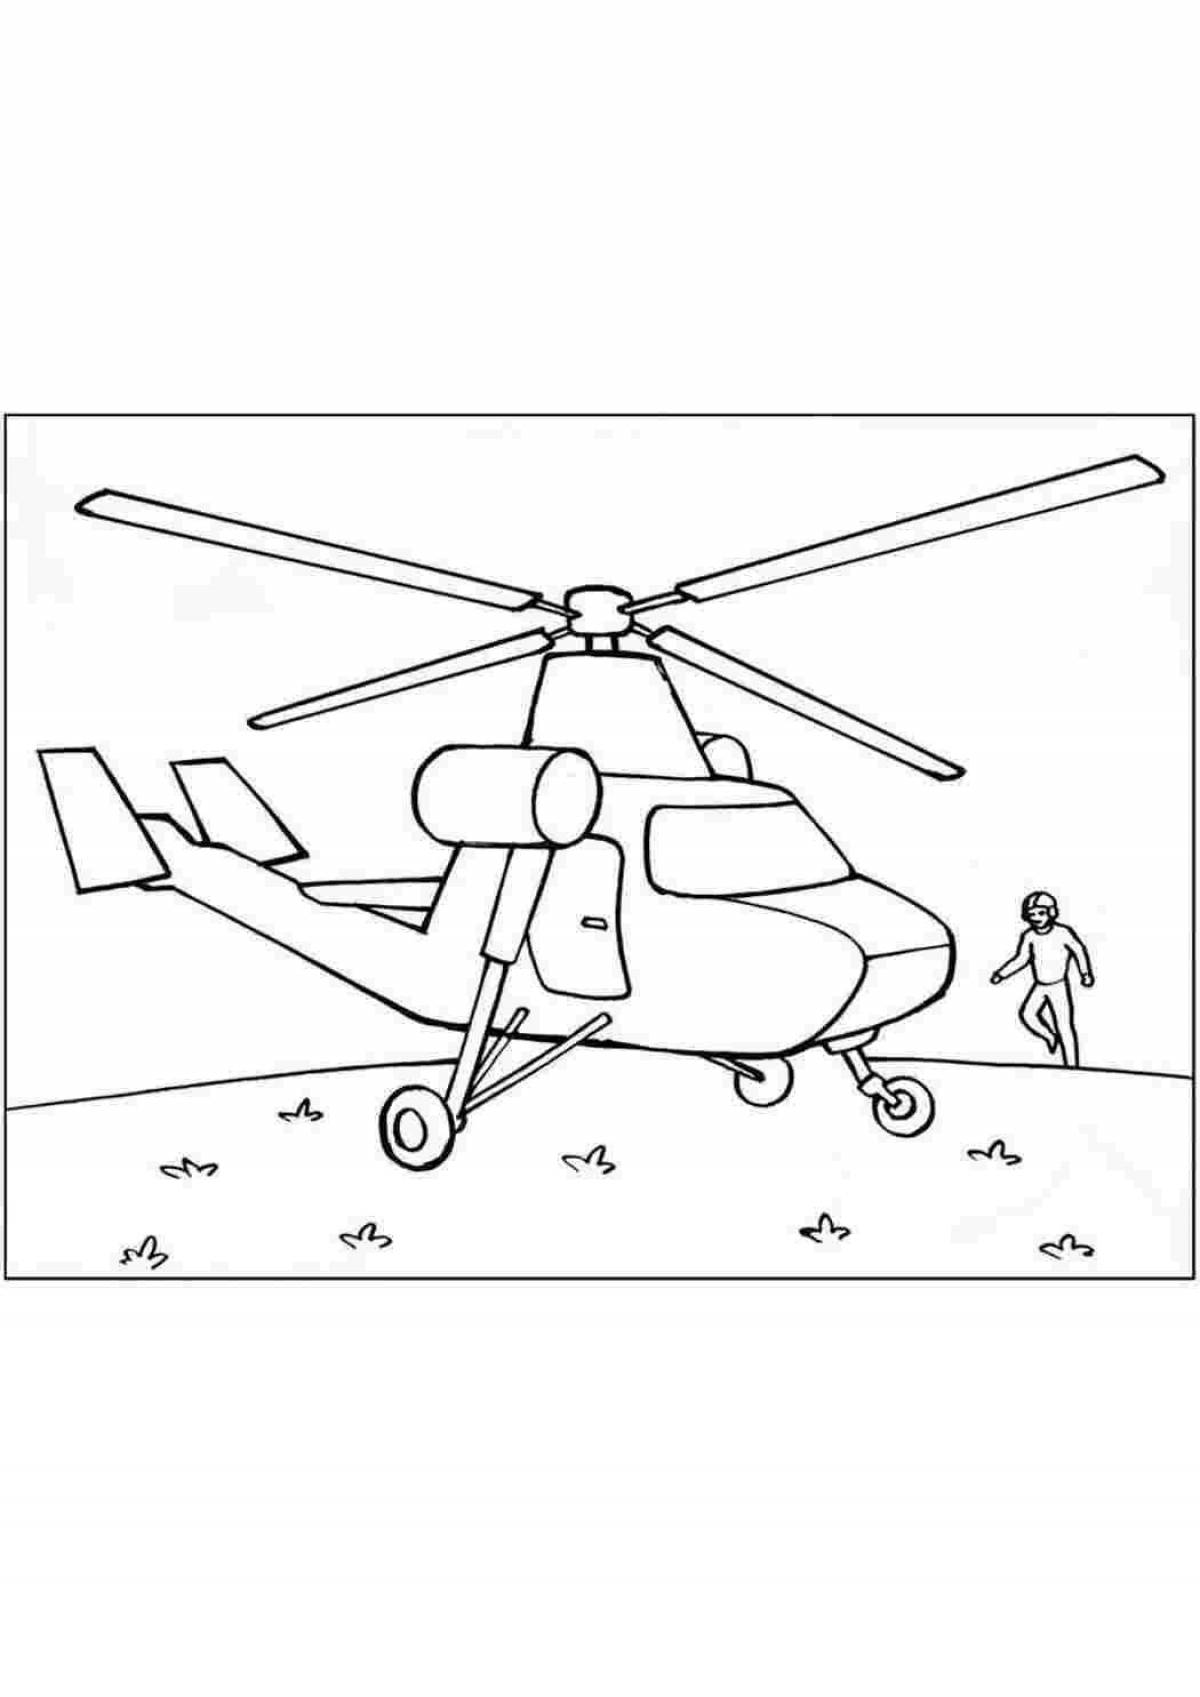 Funny tanks and planes coloring book for kids